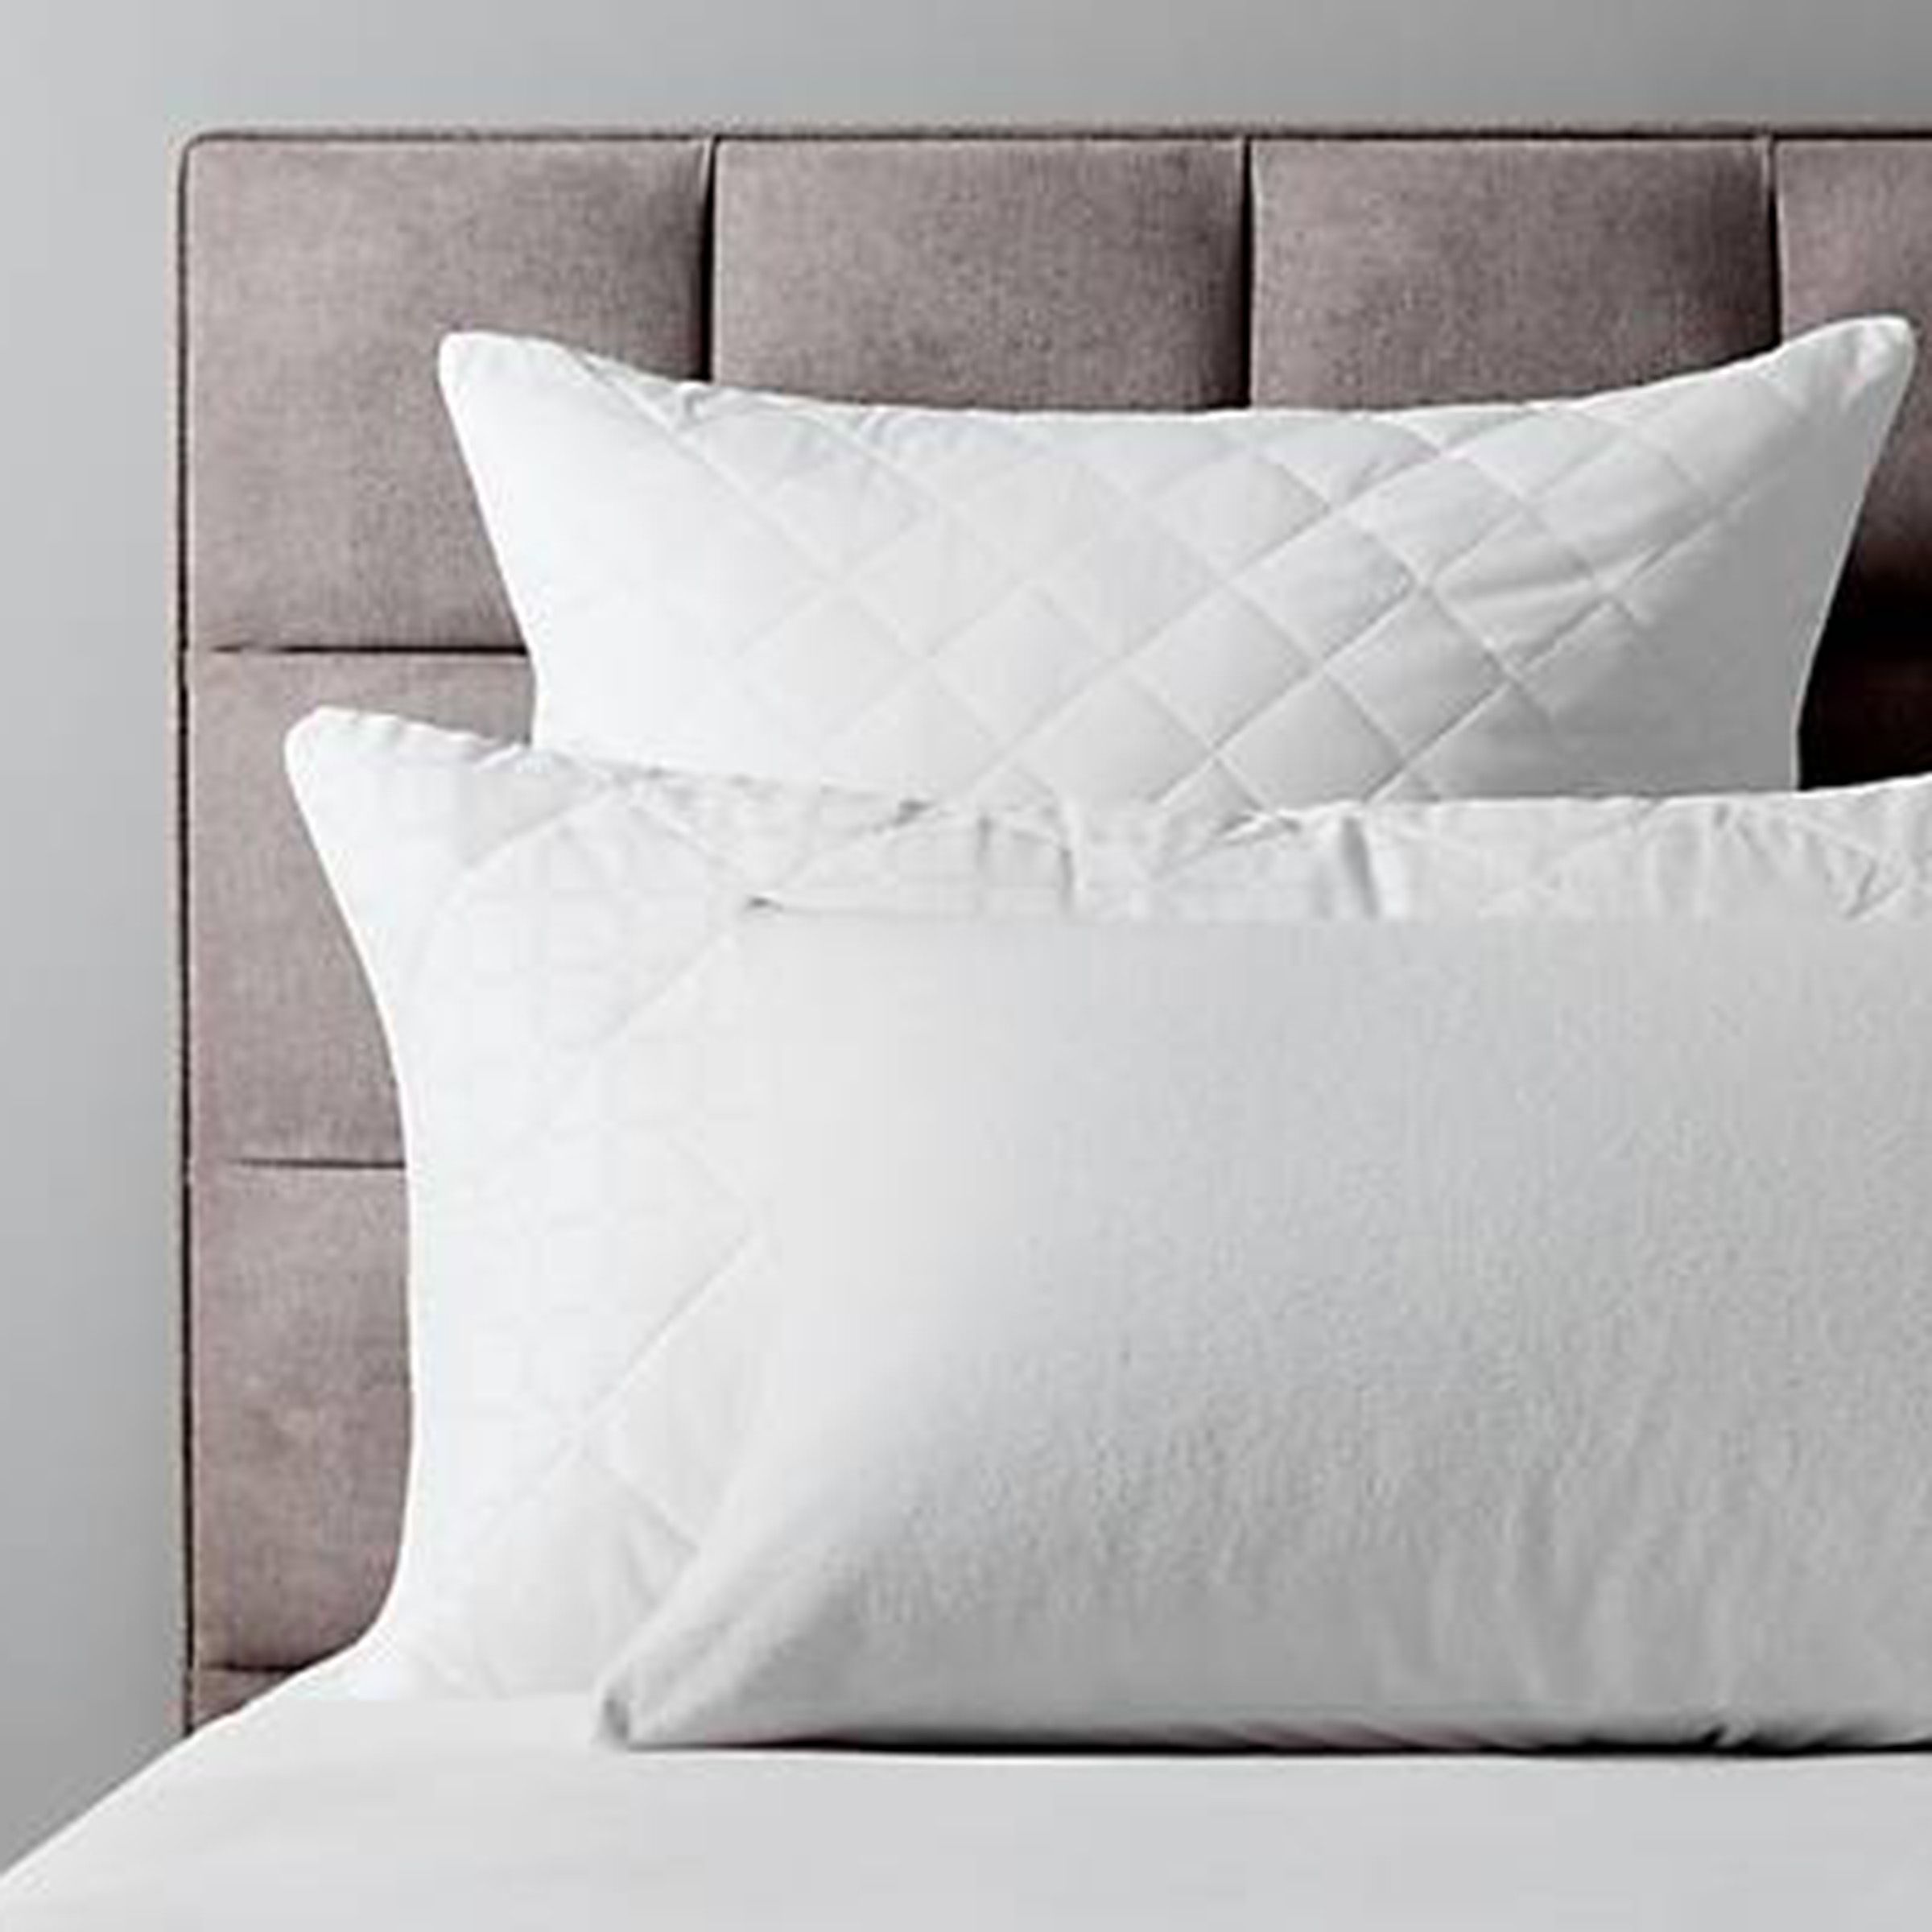 Find The Right Duvet Tog For You: Easy Tog Guide